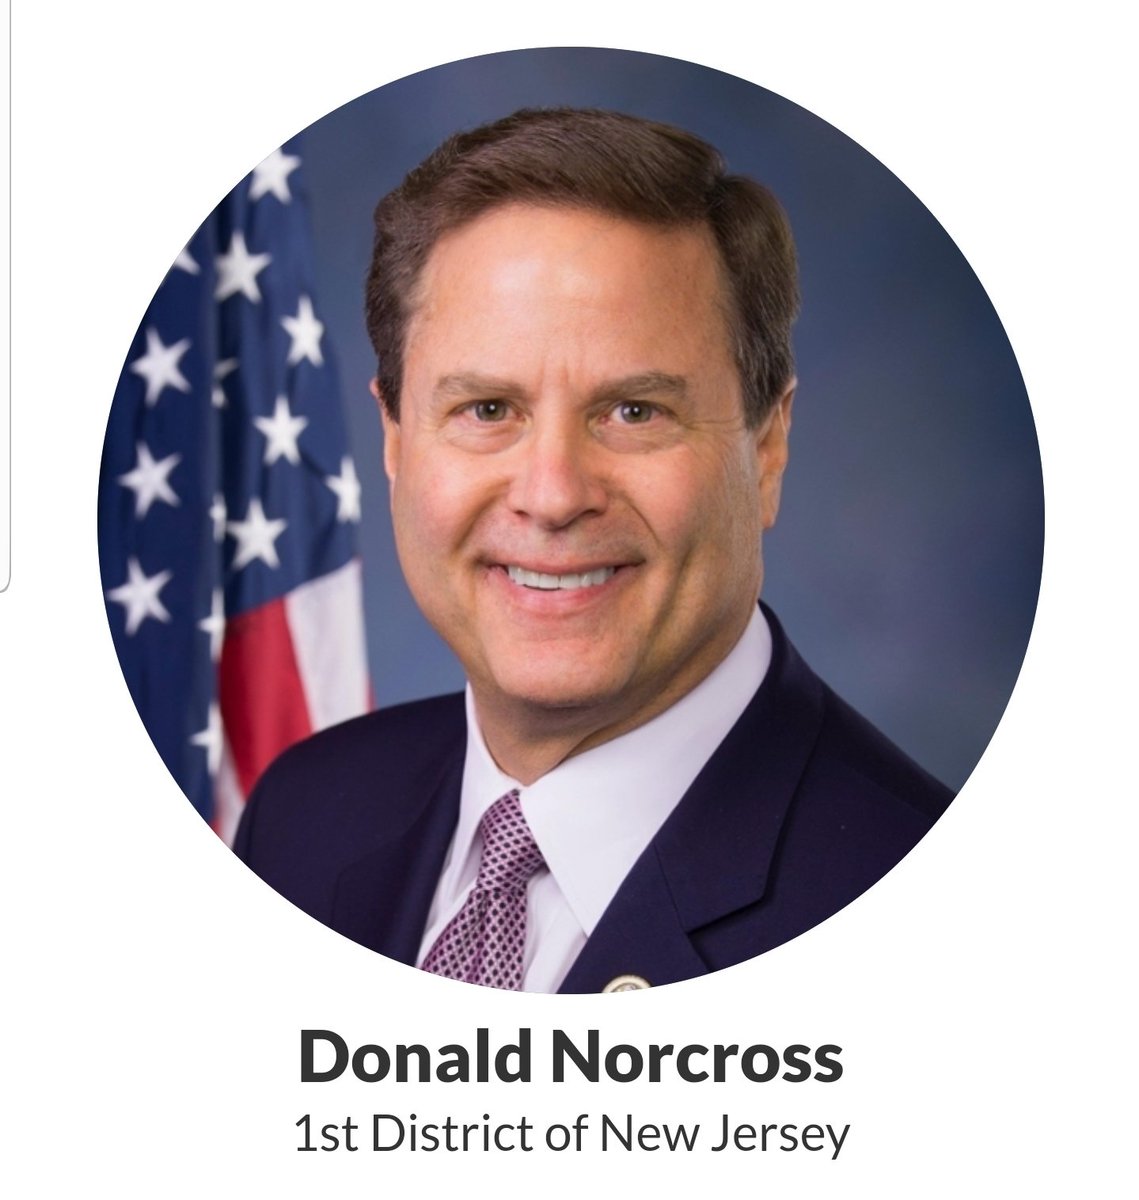 Donald Norcross, New Jersey's 1st District https://norcross.house.gov/ 58/98